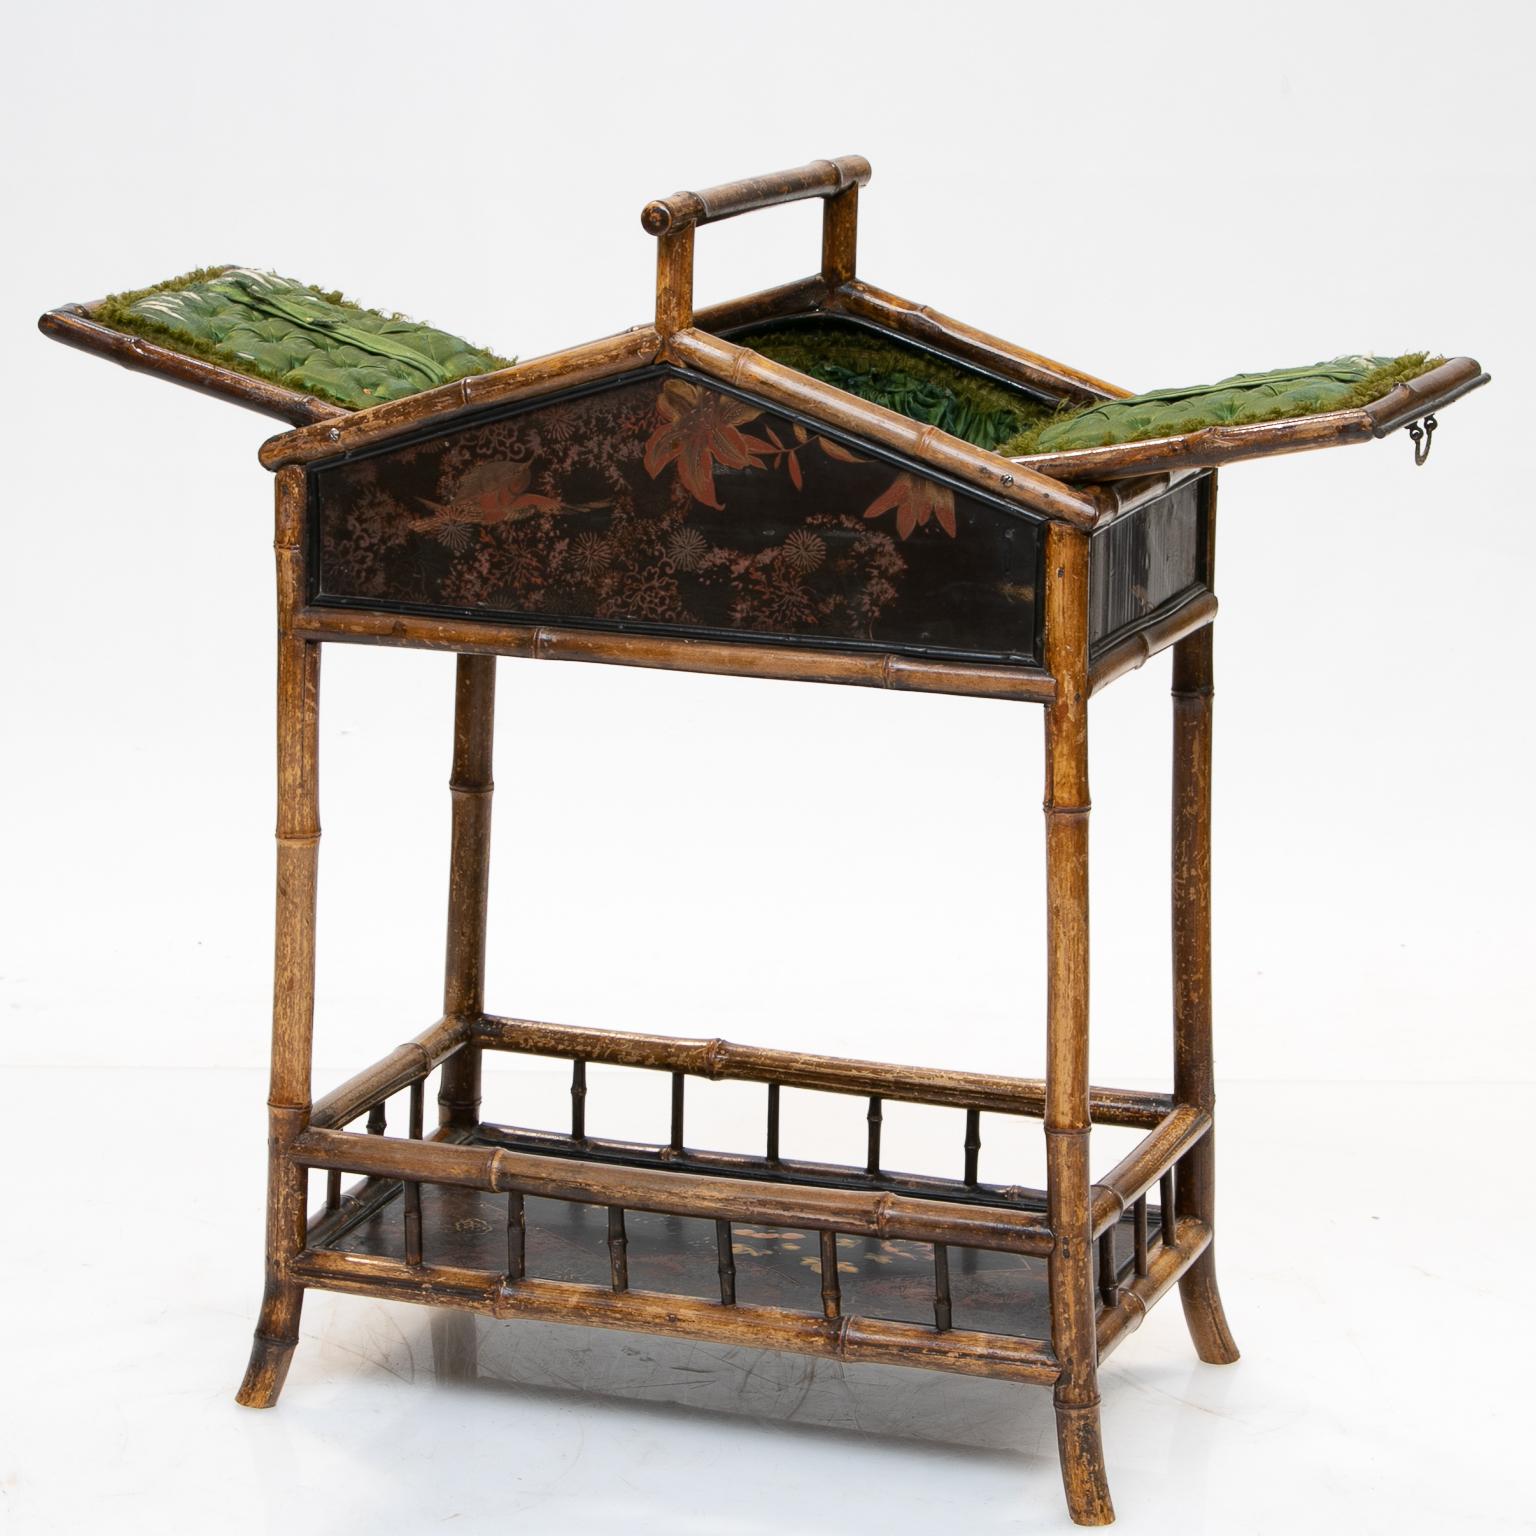 19th century bamboo and chinoiserie sewing stand
A unique double lift top sewing stand with chinoiserie panels and bamboo construction. The top is designed with two lifting doors with hardware revealing a tufted lined interior. Nice top handle.